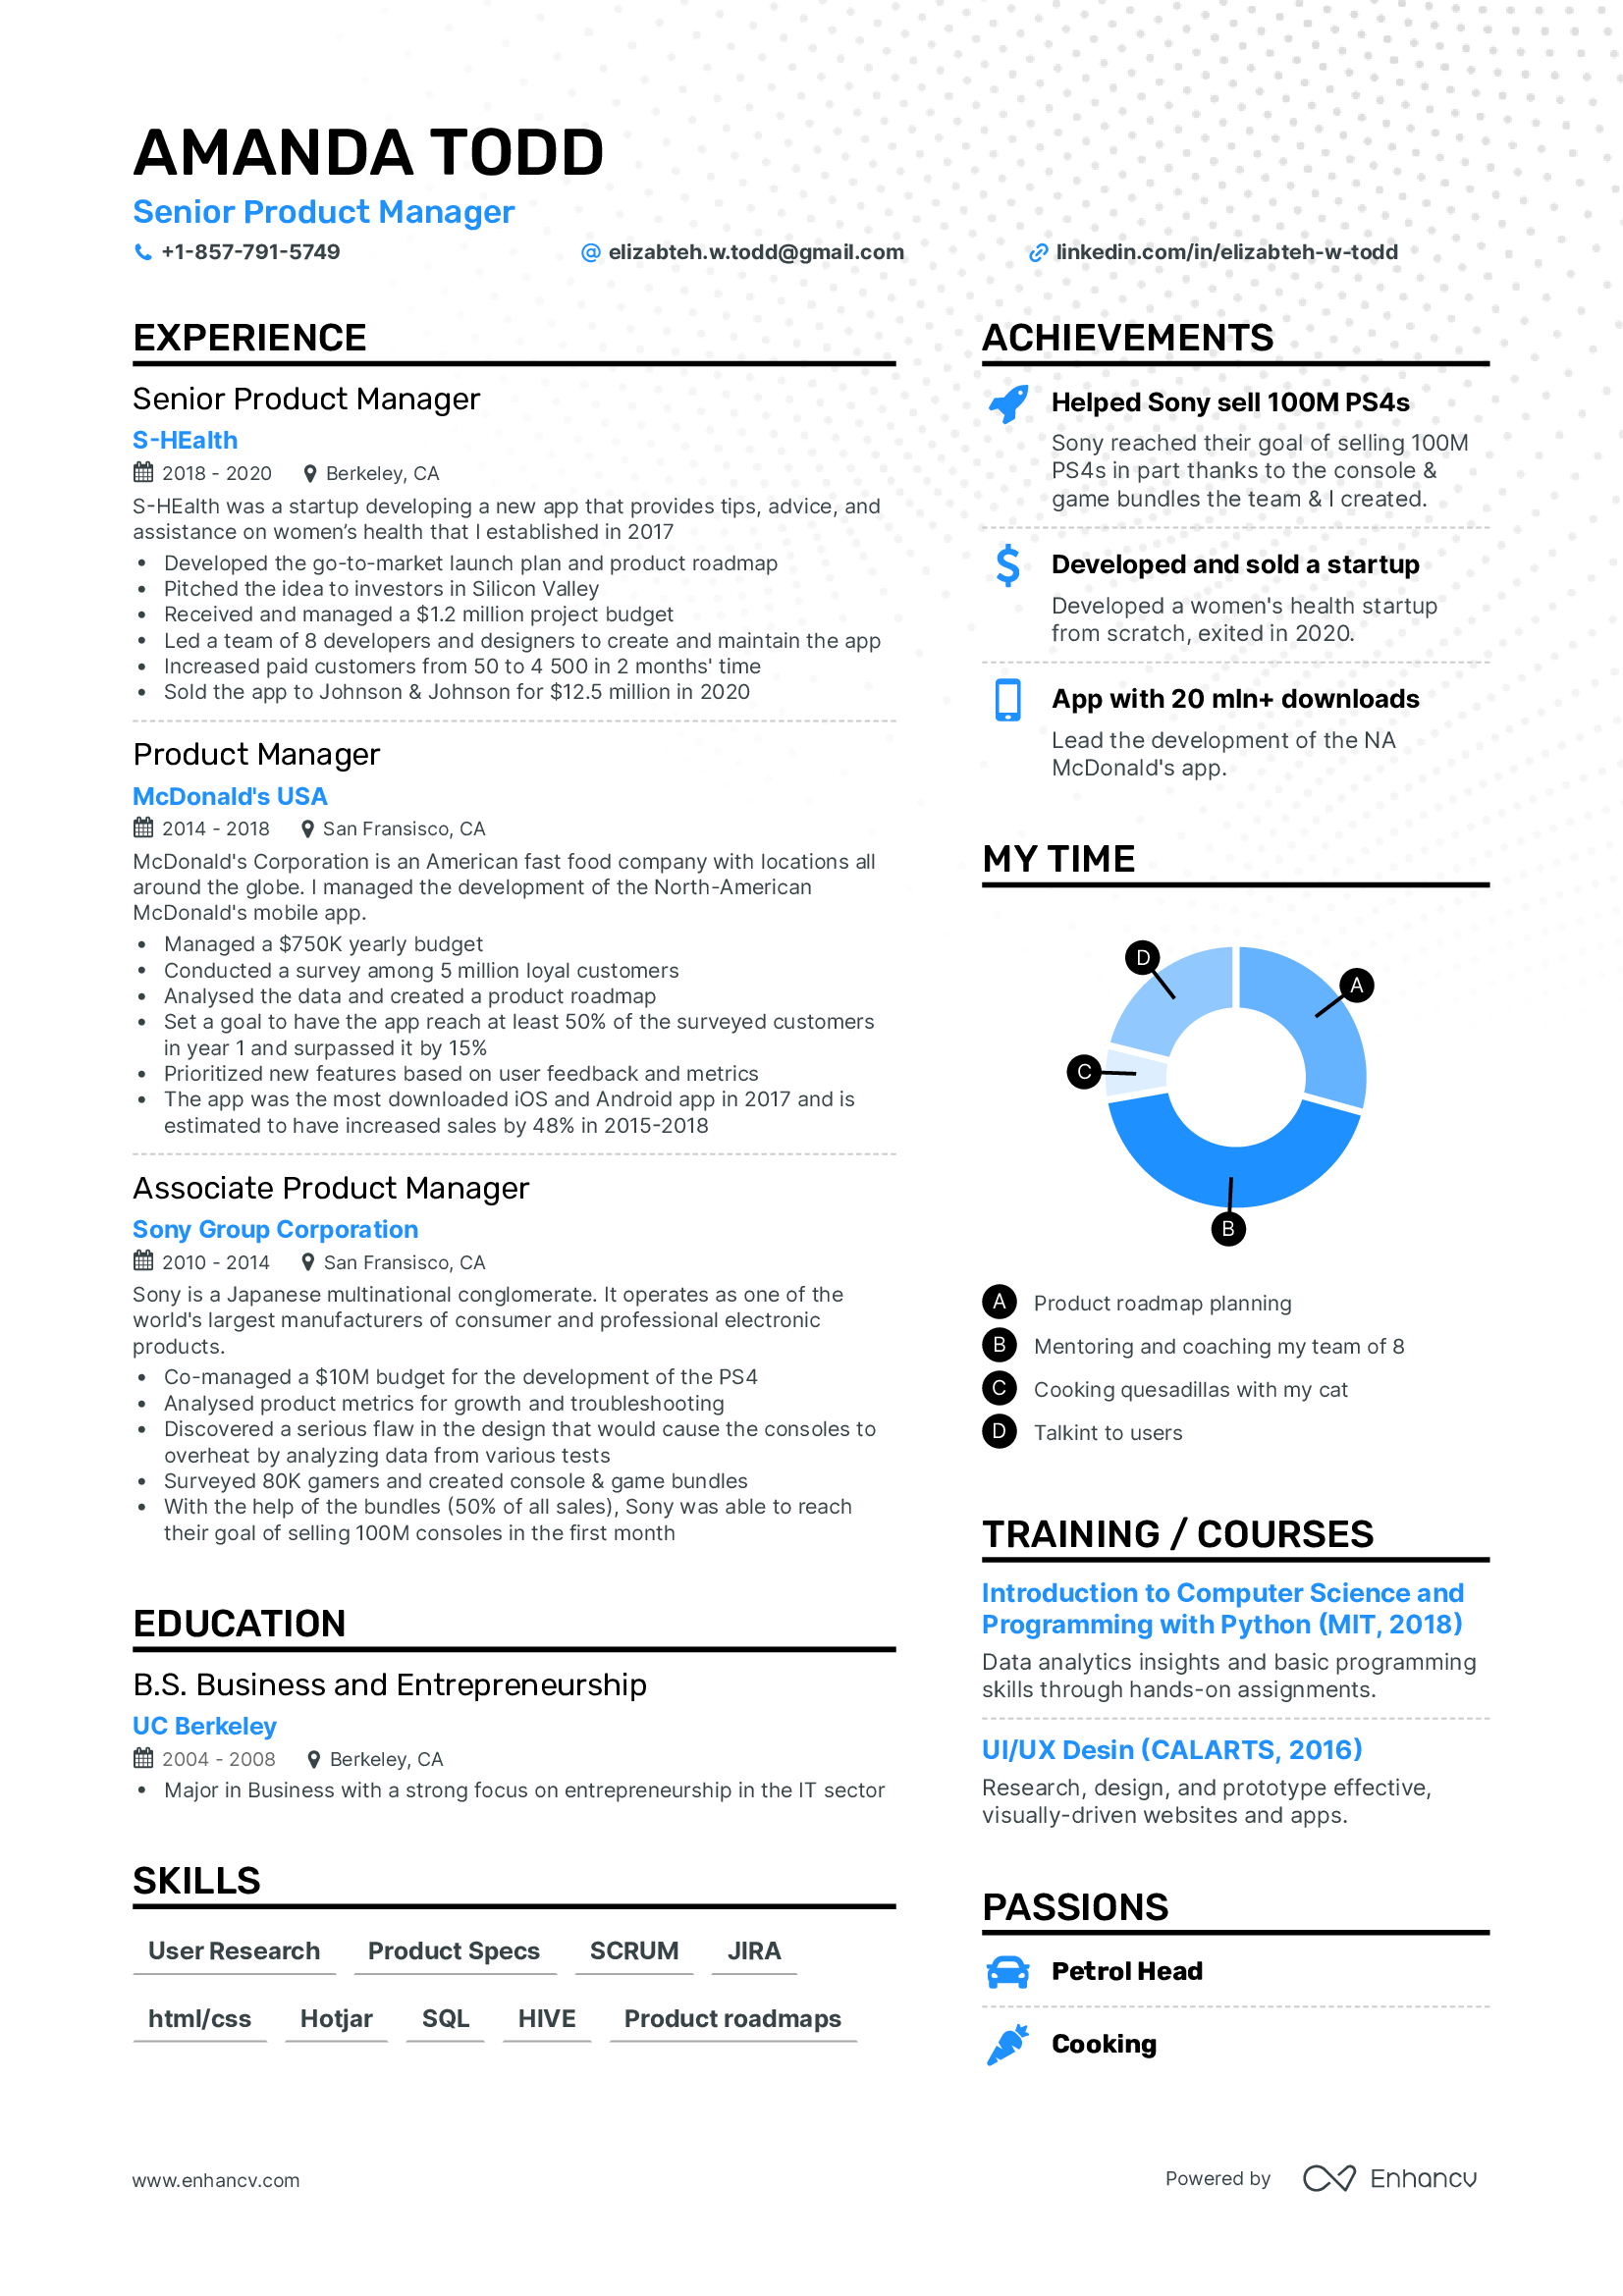 A two column resume with a blue accent color and focus on experience and achievements.